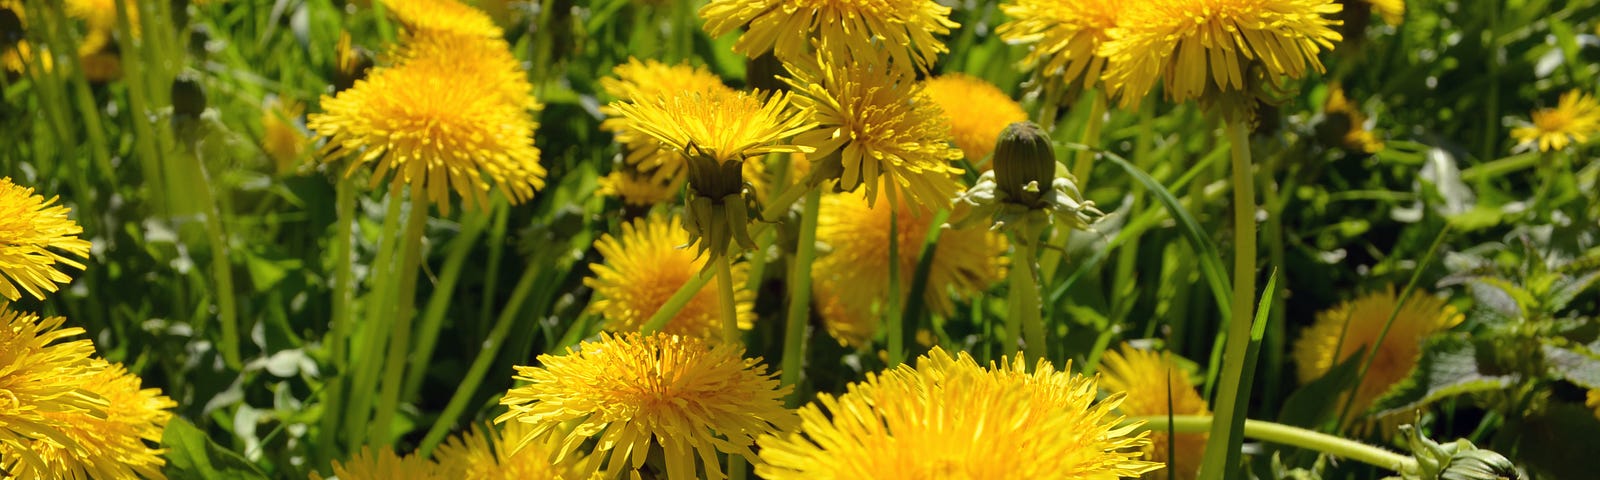 A field of dandelions with large vibrant yellow blossoms in the foreground.